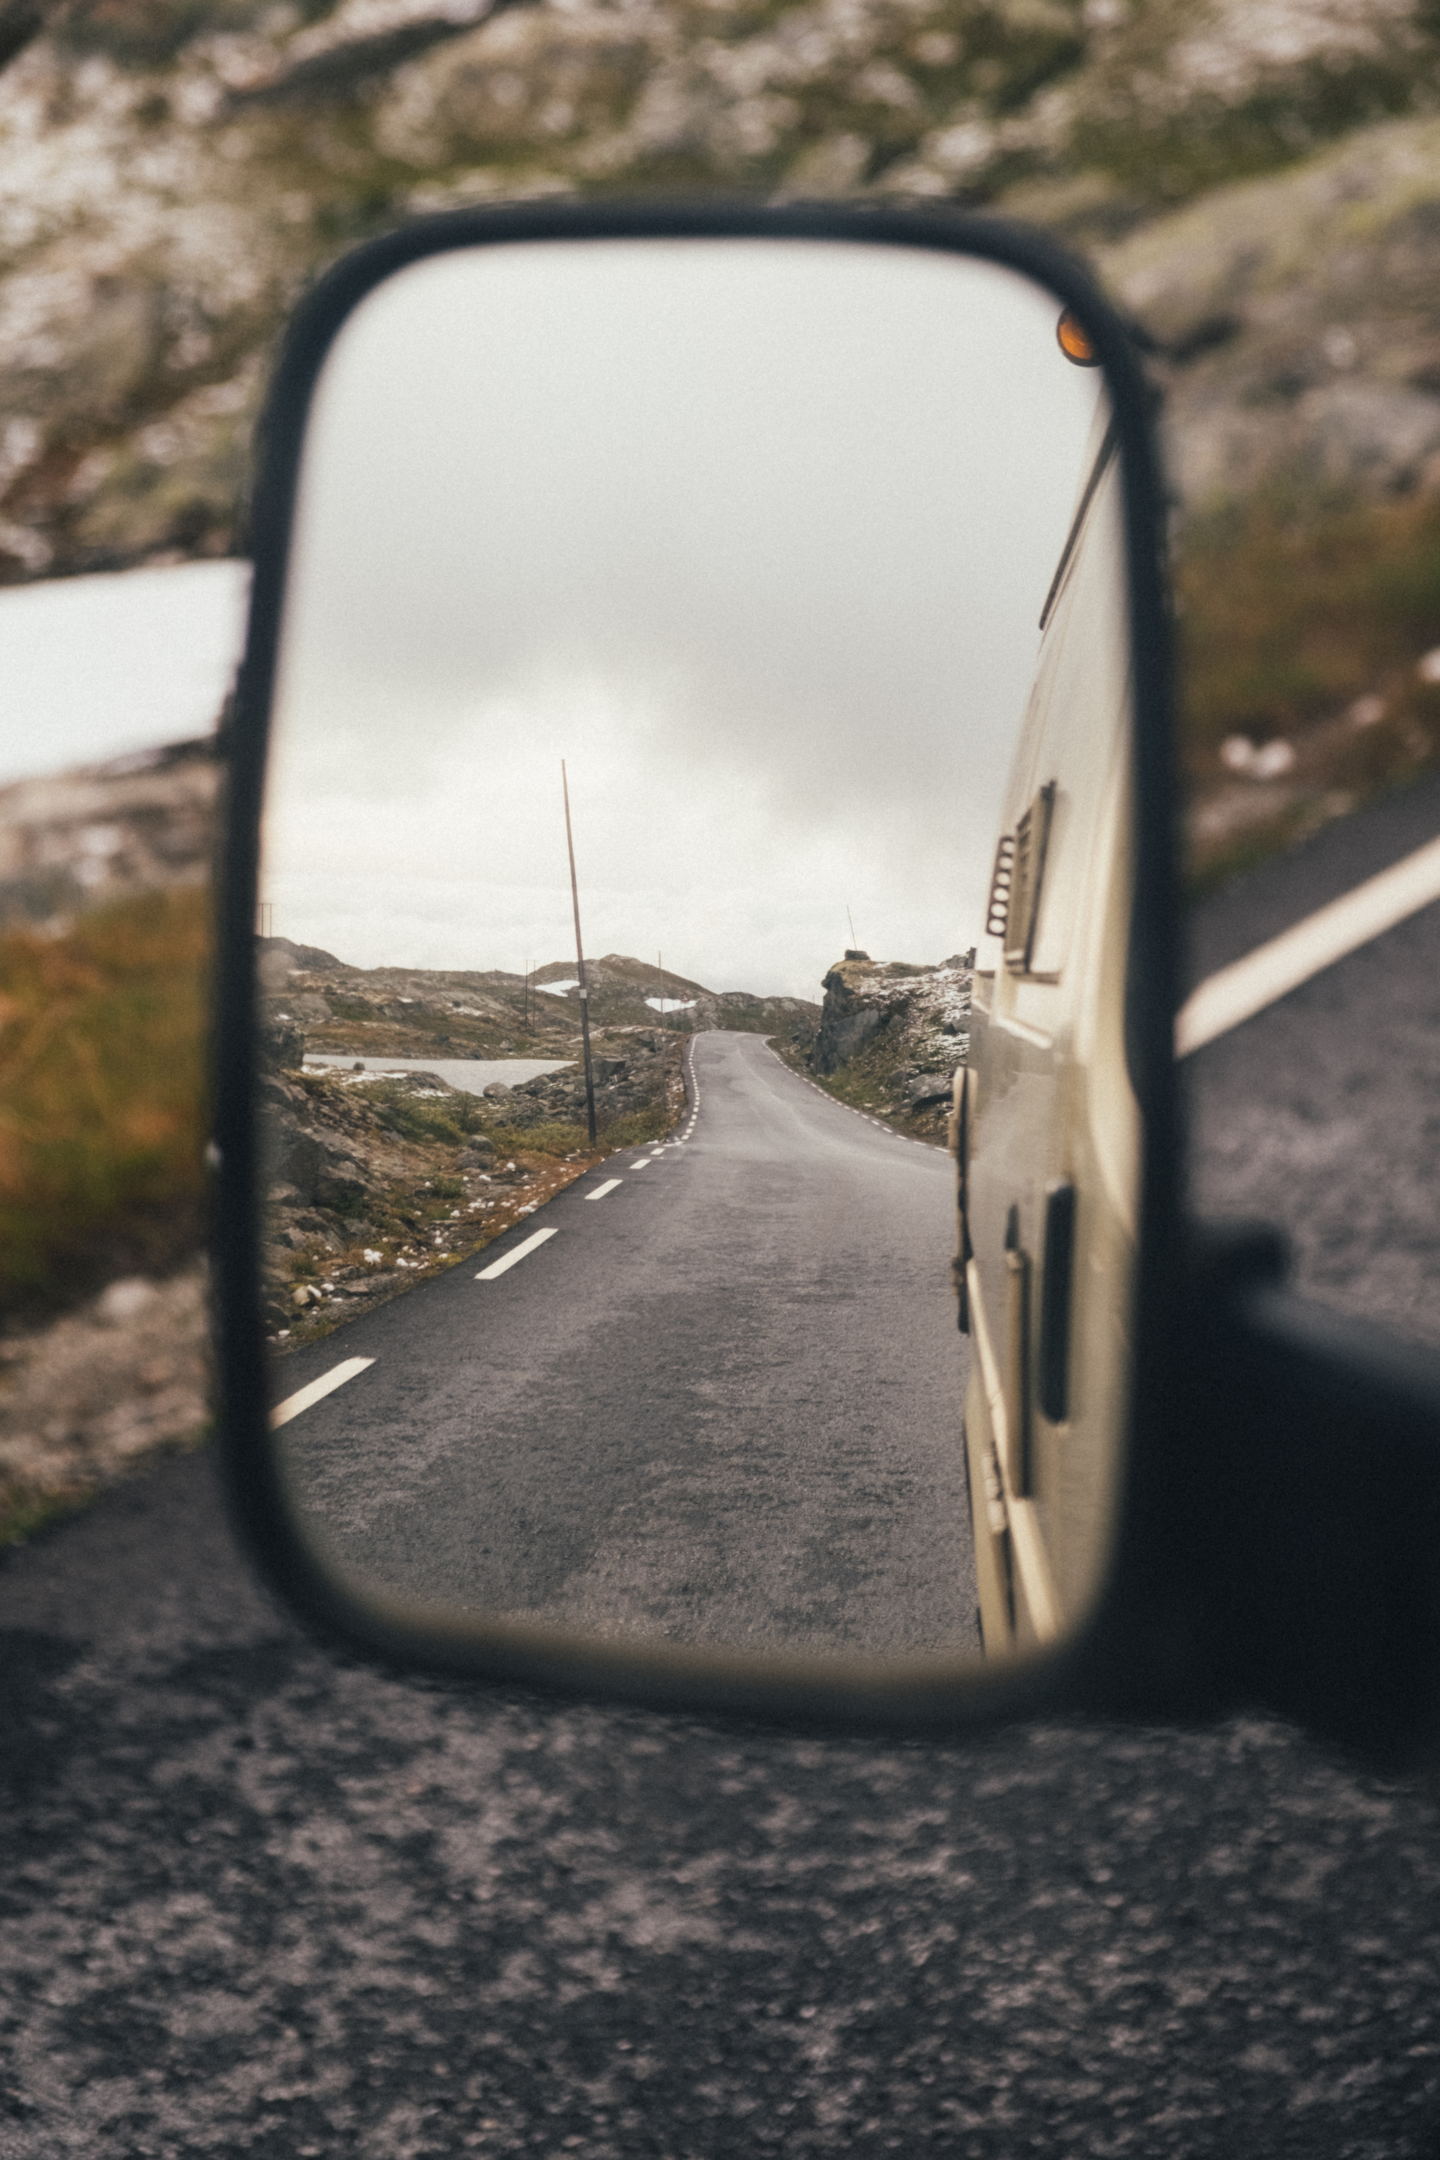 Check your mirrors. A rear-end collision can cause severe injuries.